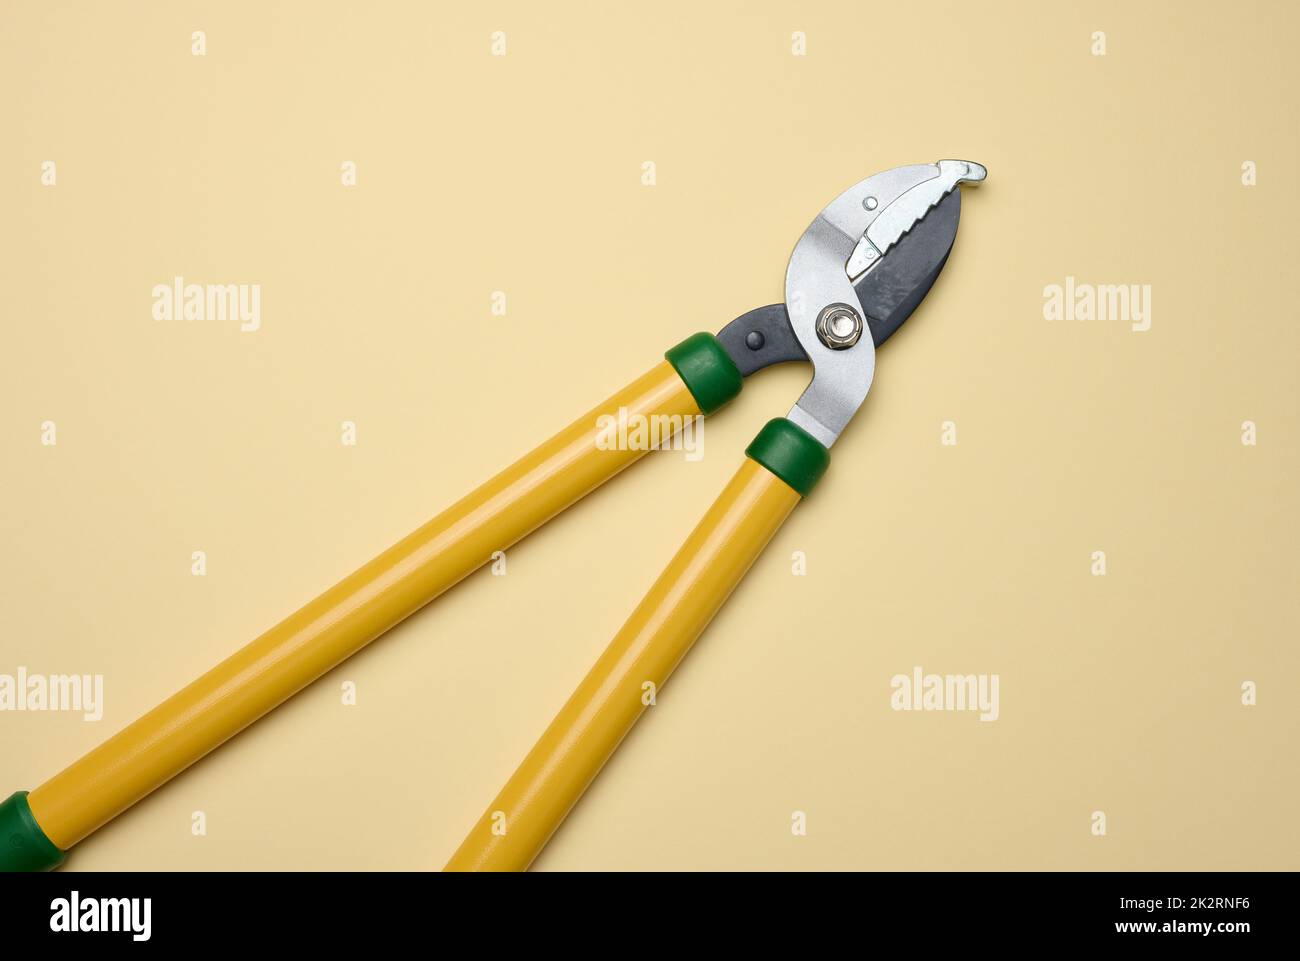 Large garden pruner for cutting branches on trees on a paper background Stock Photo